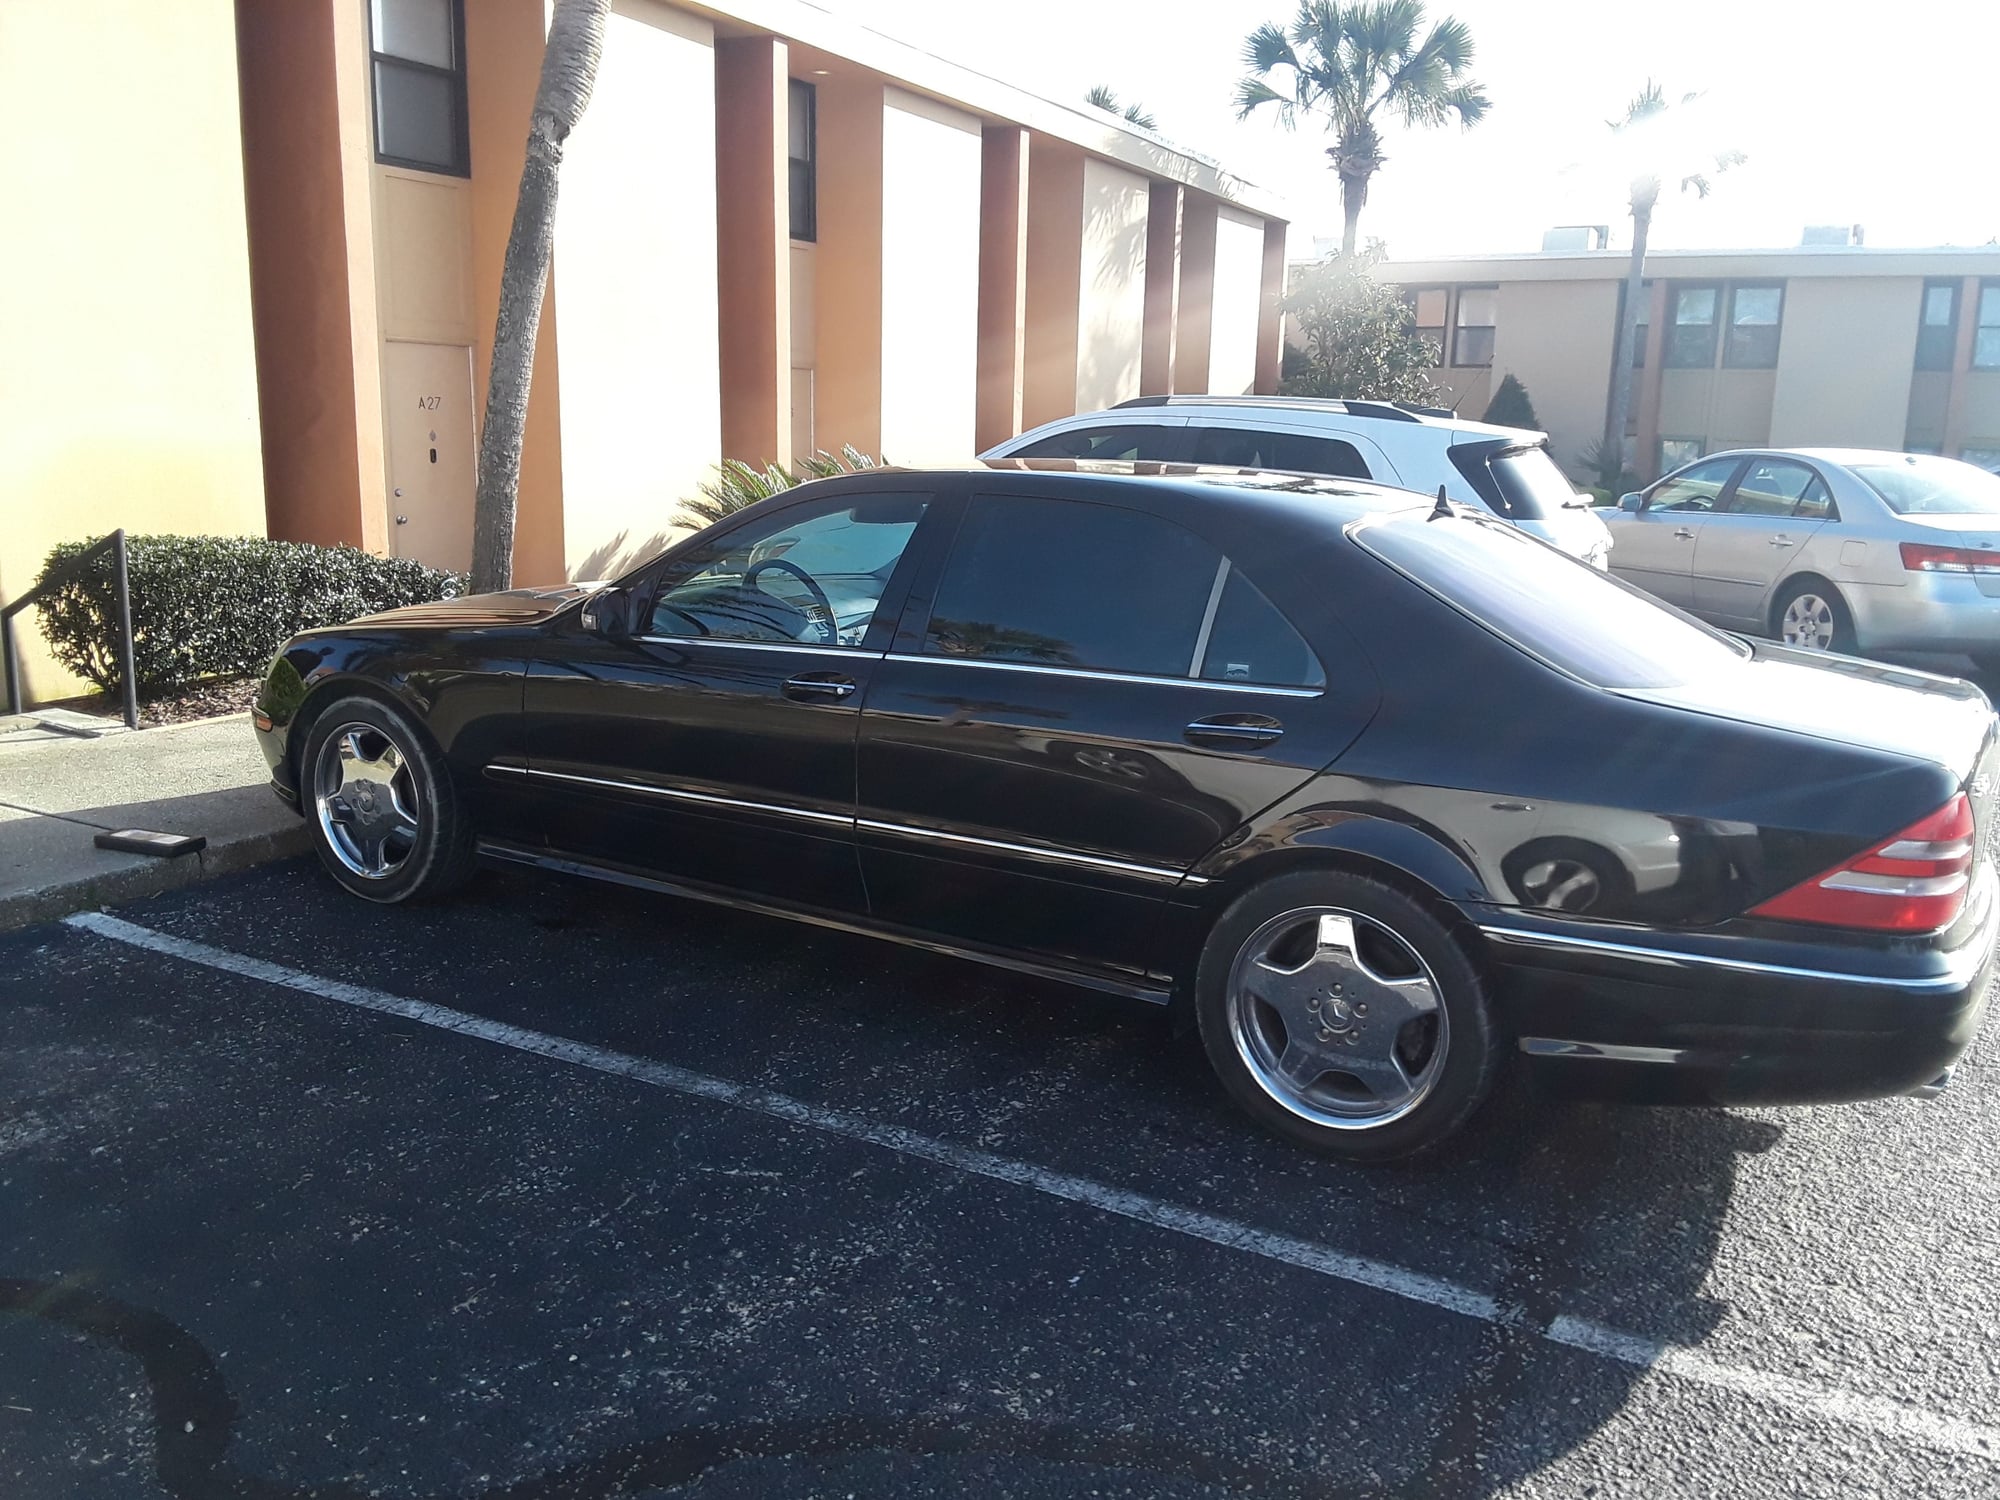 2001 Mercedes-Benz S55 AMG - 2001 S55 AMG Mercedes-Benz 93K Miles - $5,500 - Used - VIN WDBNG73J91A202022 - 93,600 Miles - 8 cyl - 2WD - Automatic - Sedan - Black - Gulf Breeze, FL 32561, United States